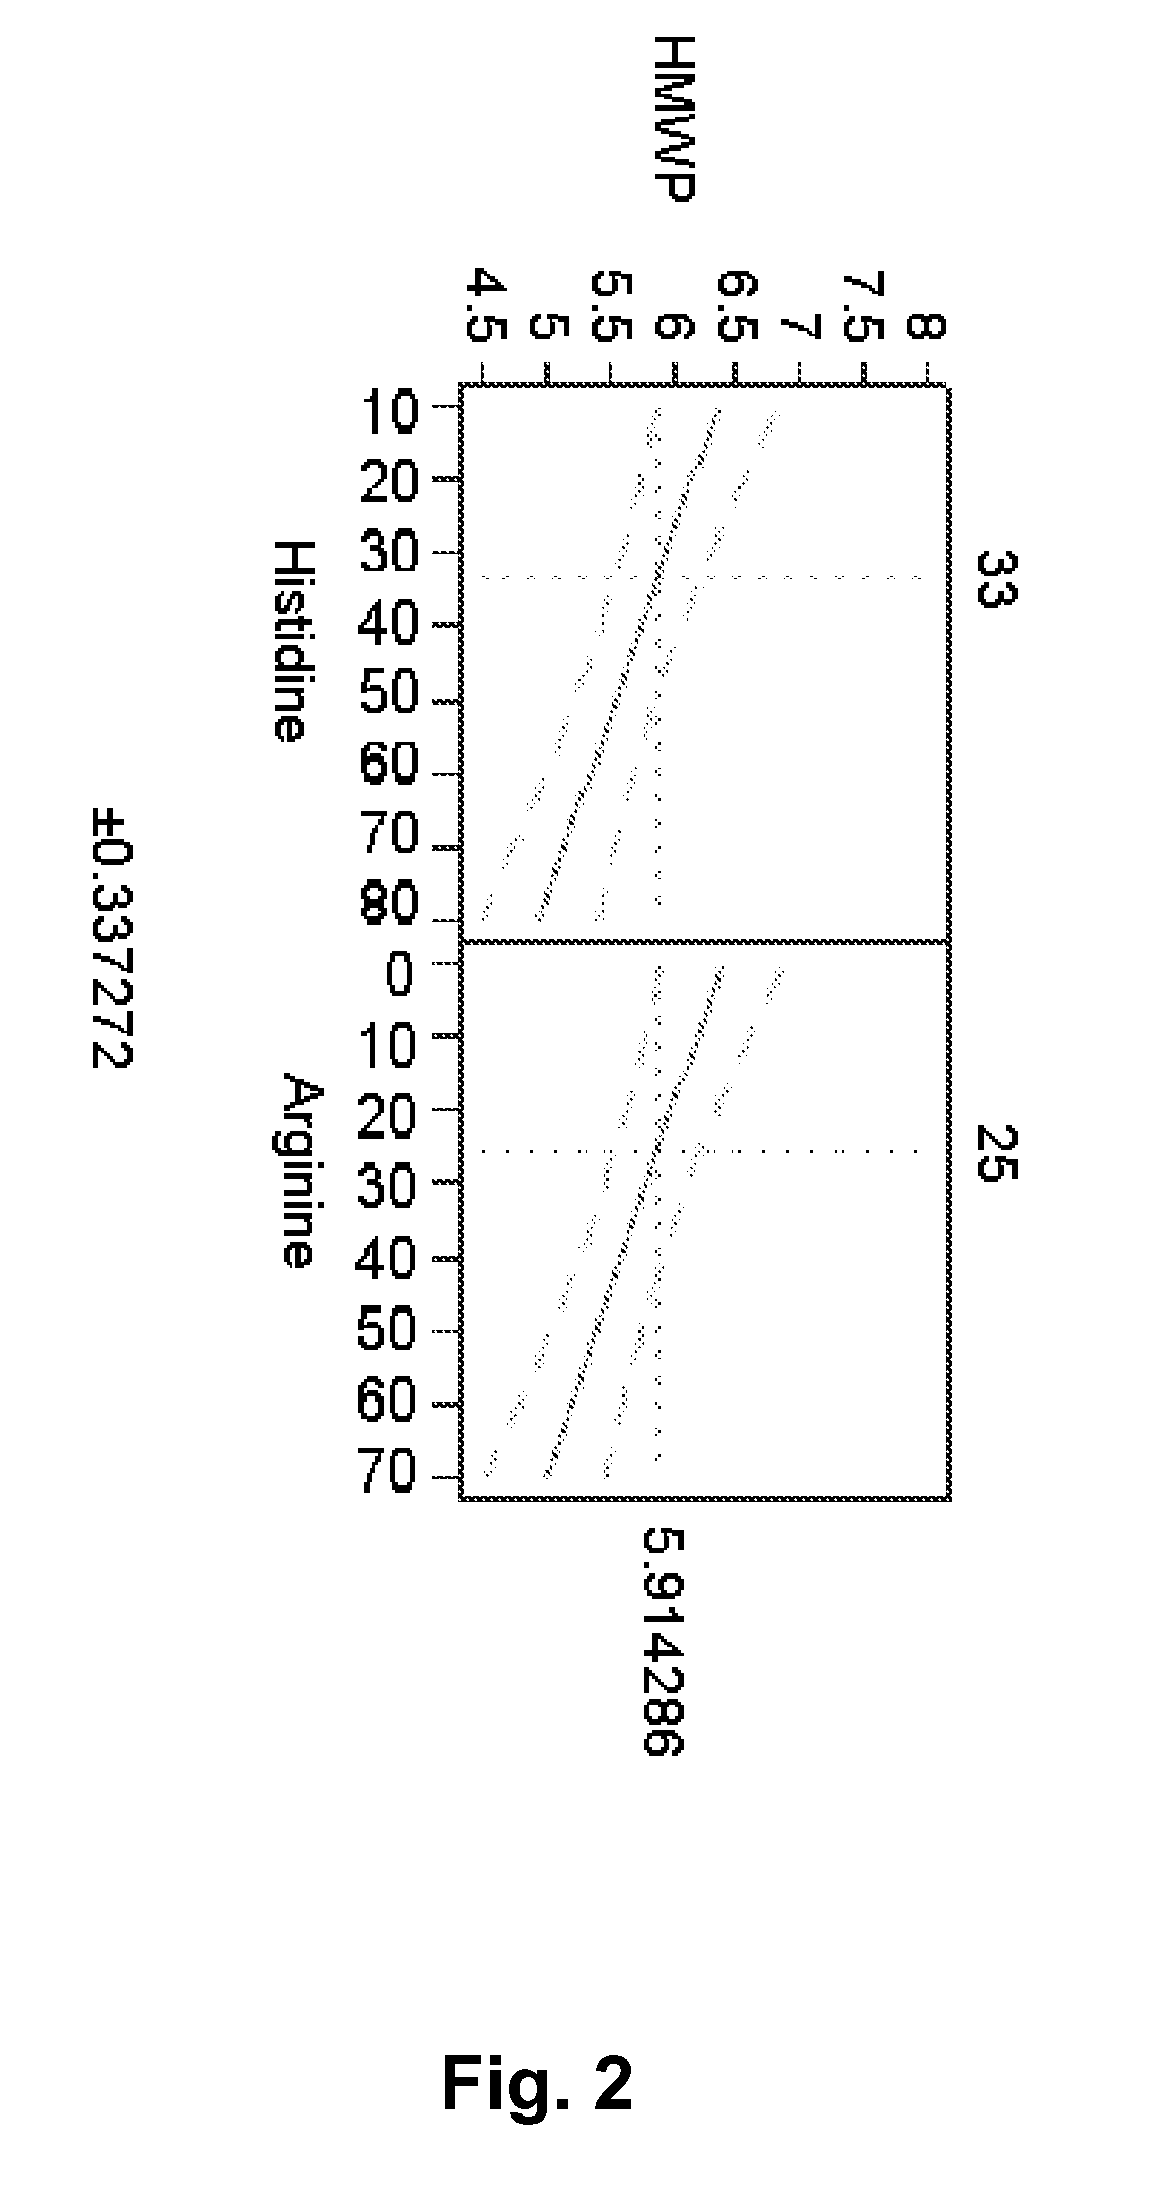 Stable antibody containing compositions